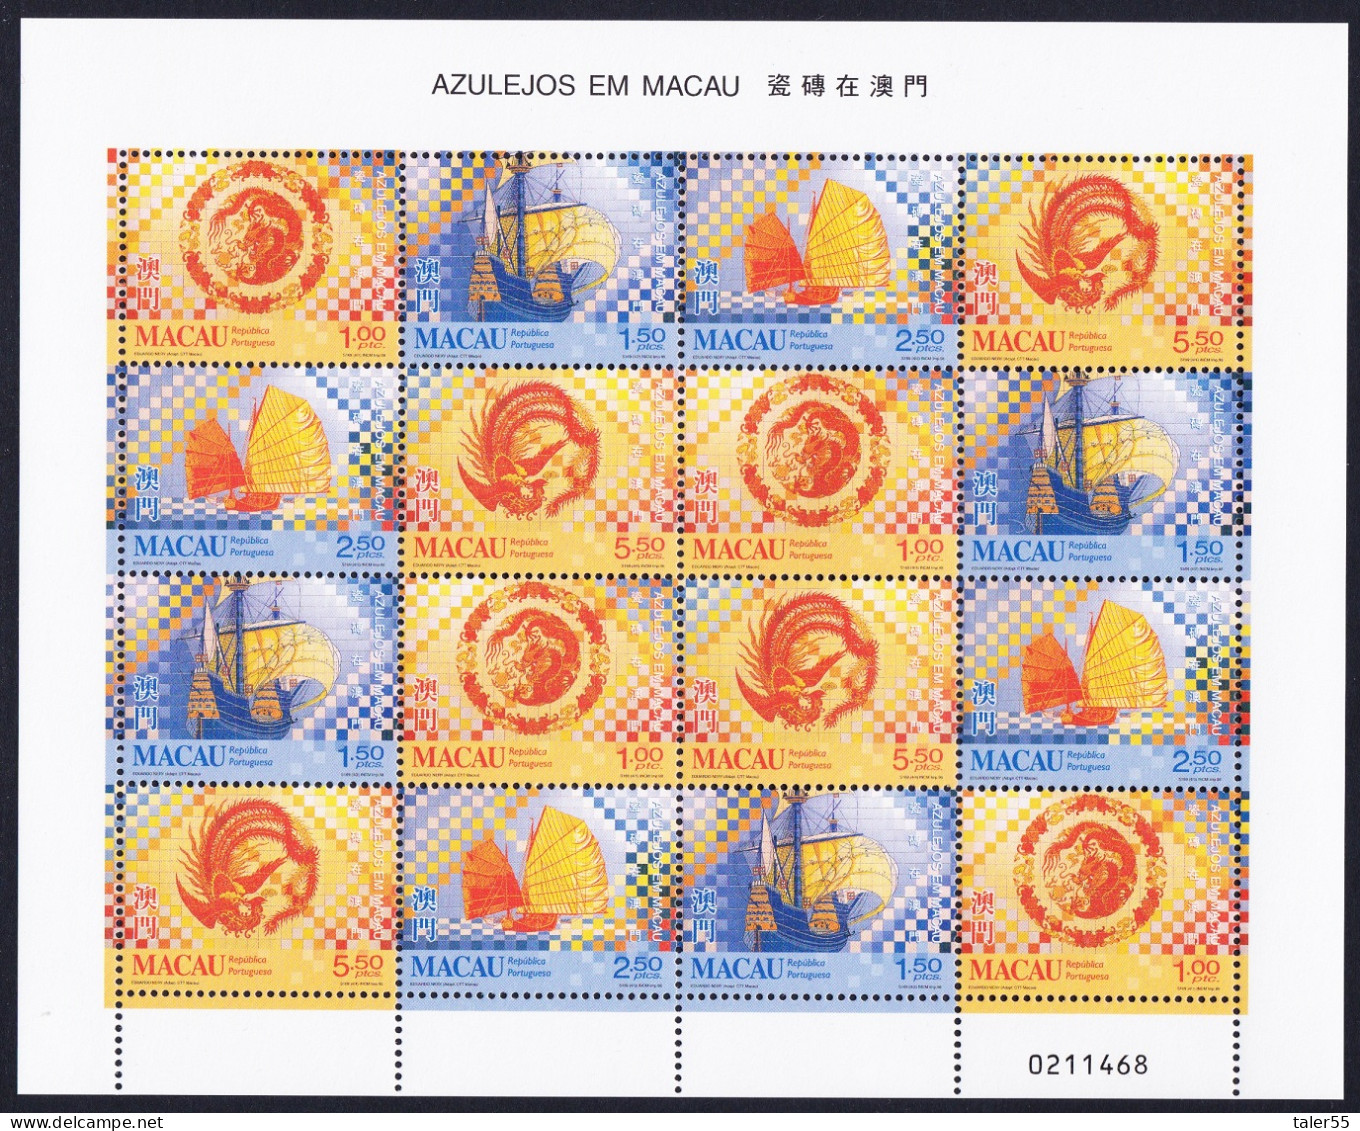 Macao Macau Tiles From Macao Sheetlet Of 4 Sets 1998 MNH SG#1076-1079 Sc#965a - Unused Stamps